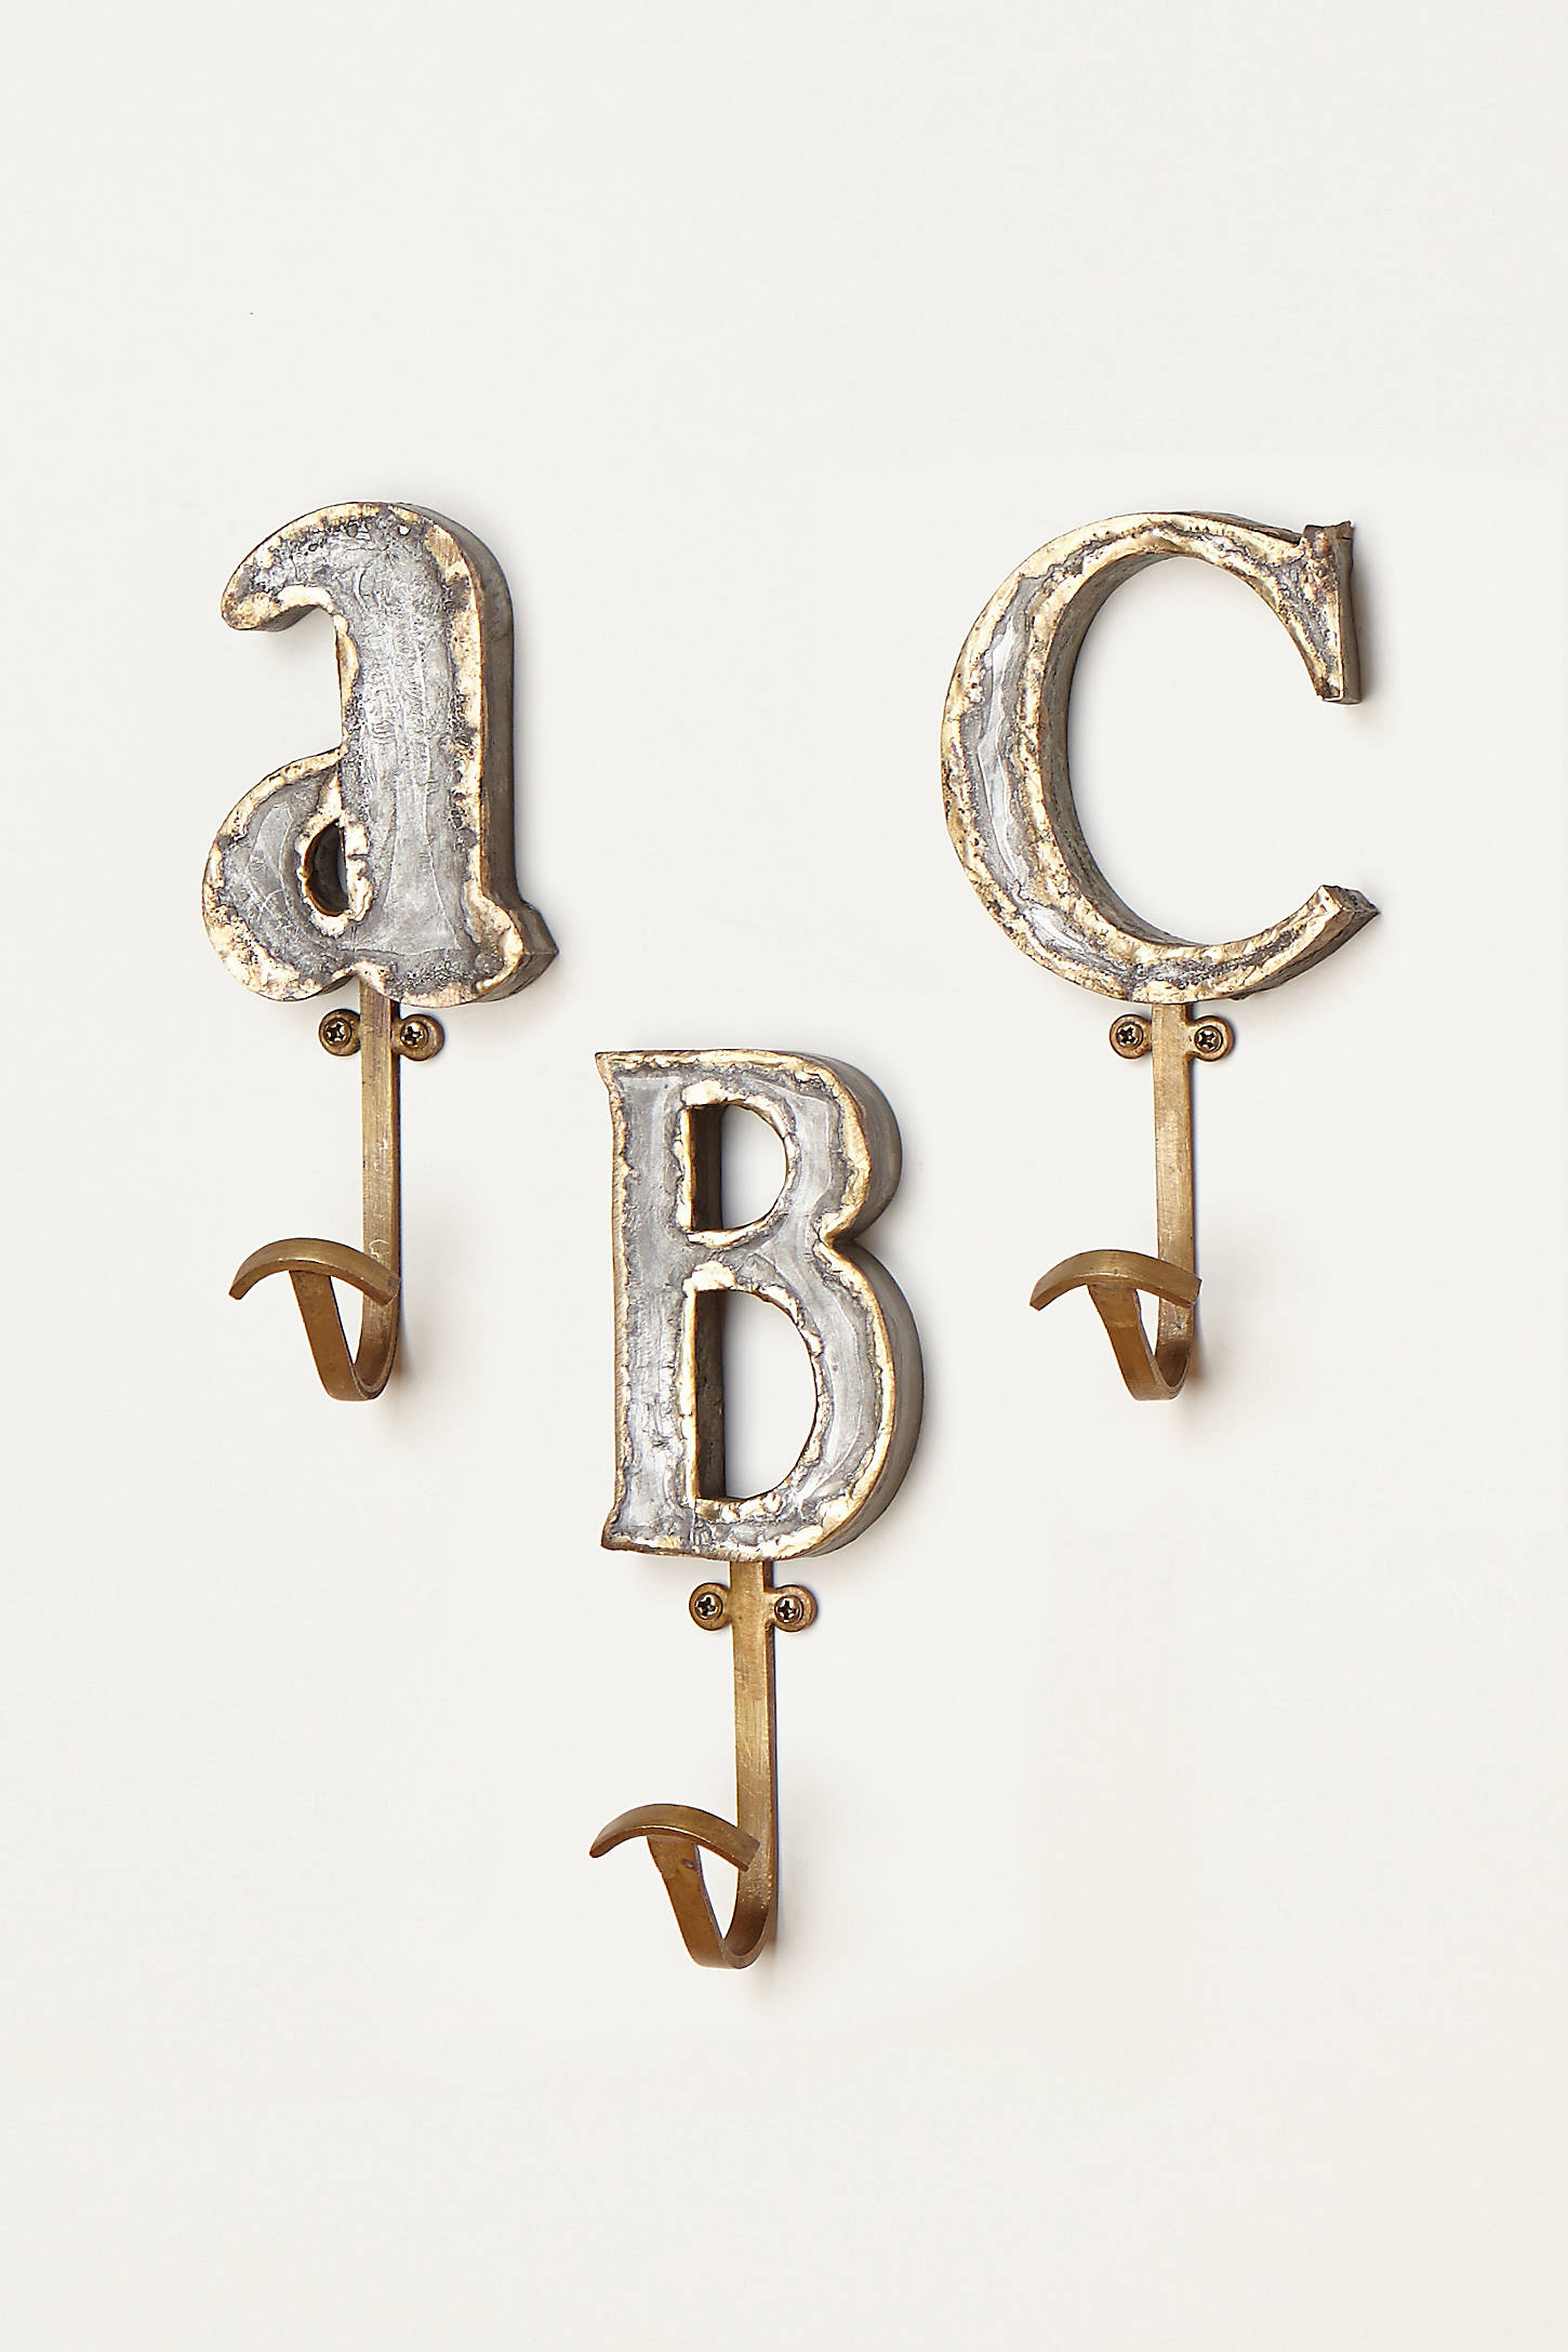 Marquee Letter Hook By Anthropologie in Bronze Size I - Anthropologie